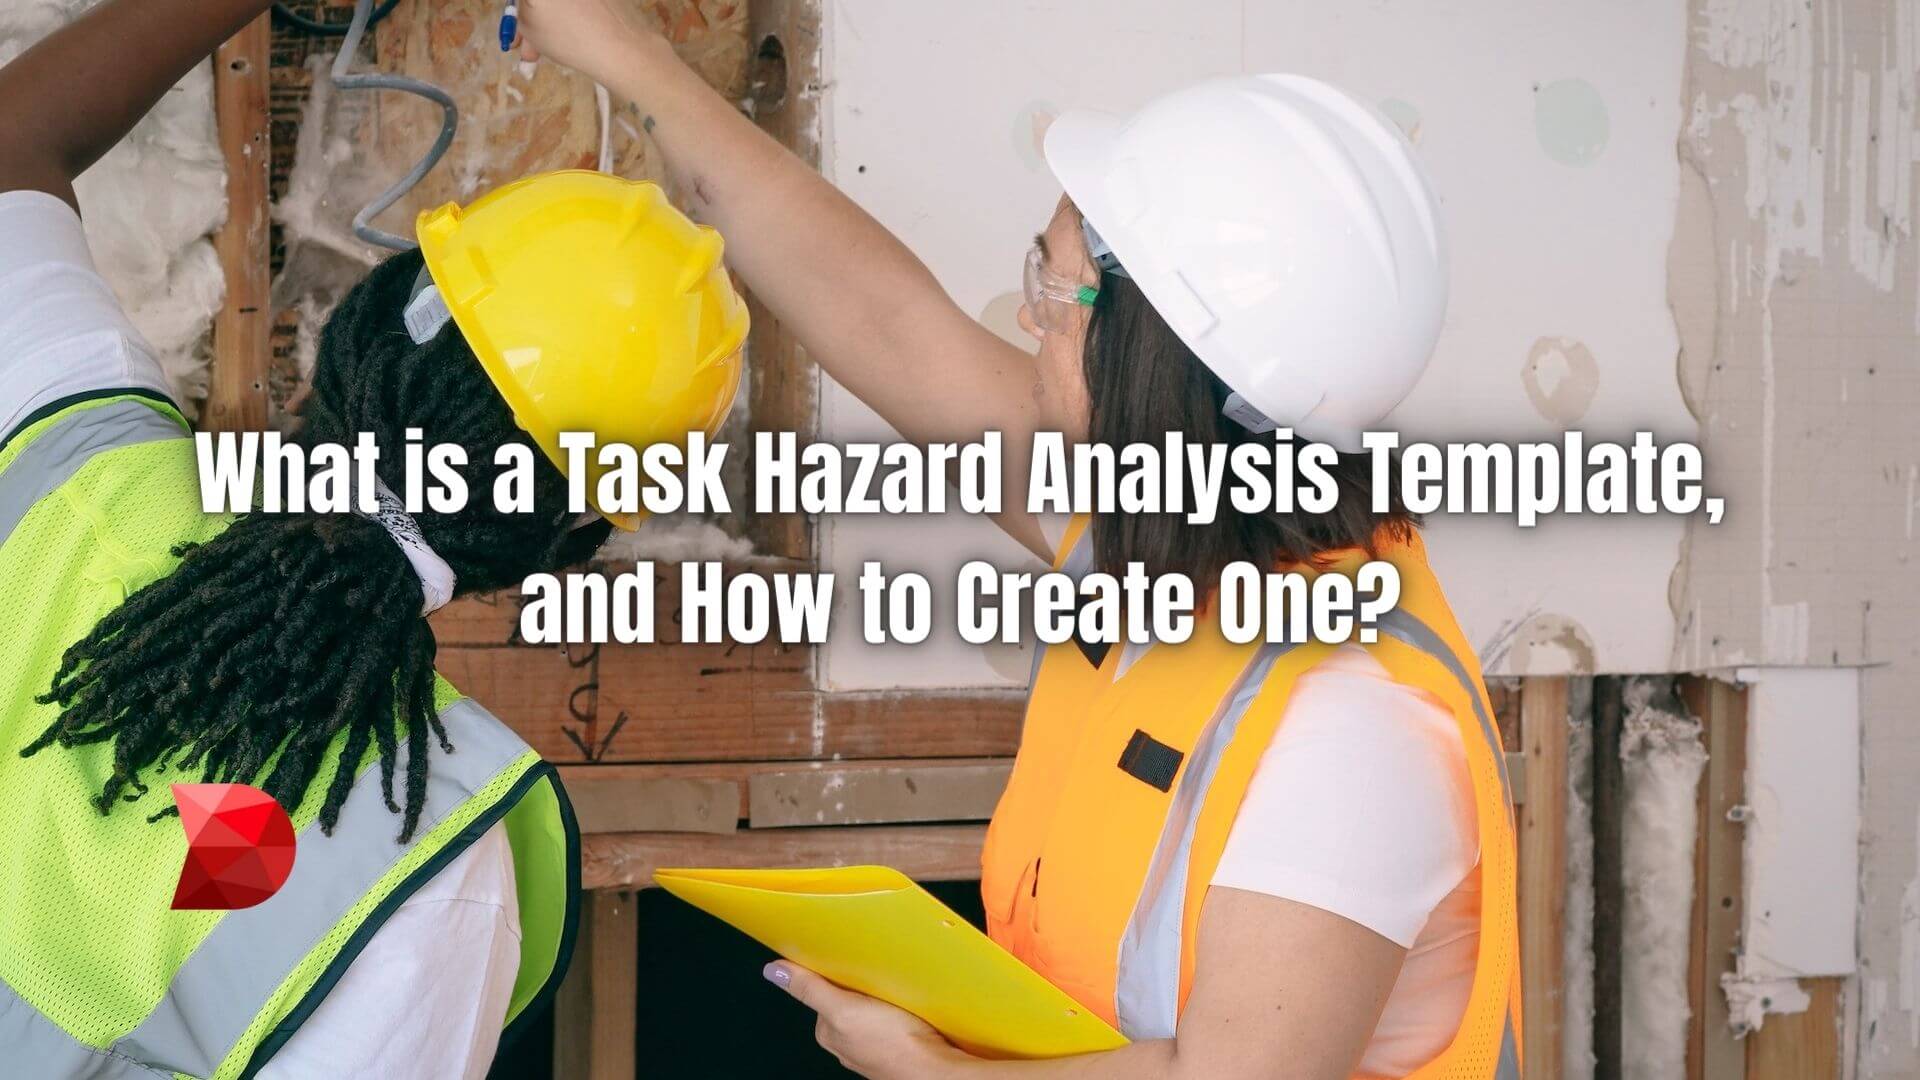 Utilizing a Task Hazard Analysis Form Template offers advantages such as consistency, efficiency, and compliance. Here's how to make one!